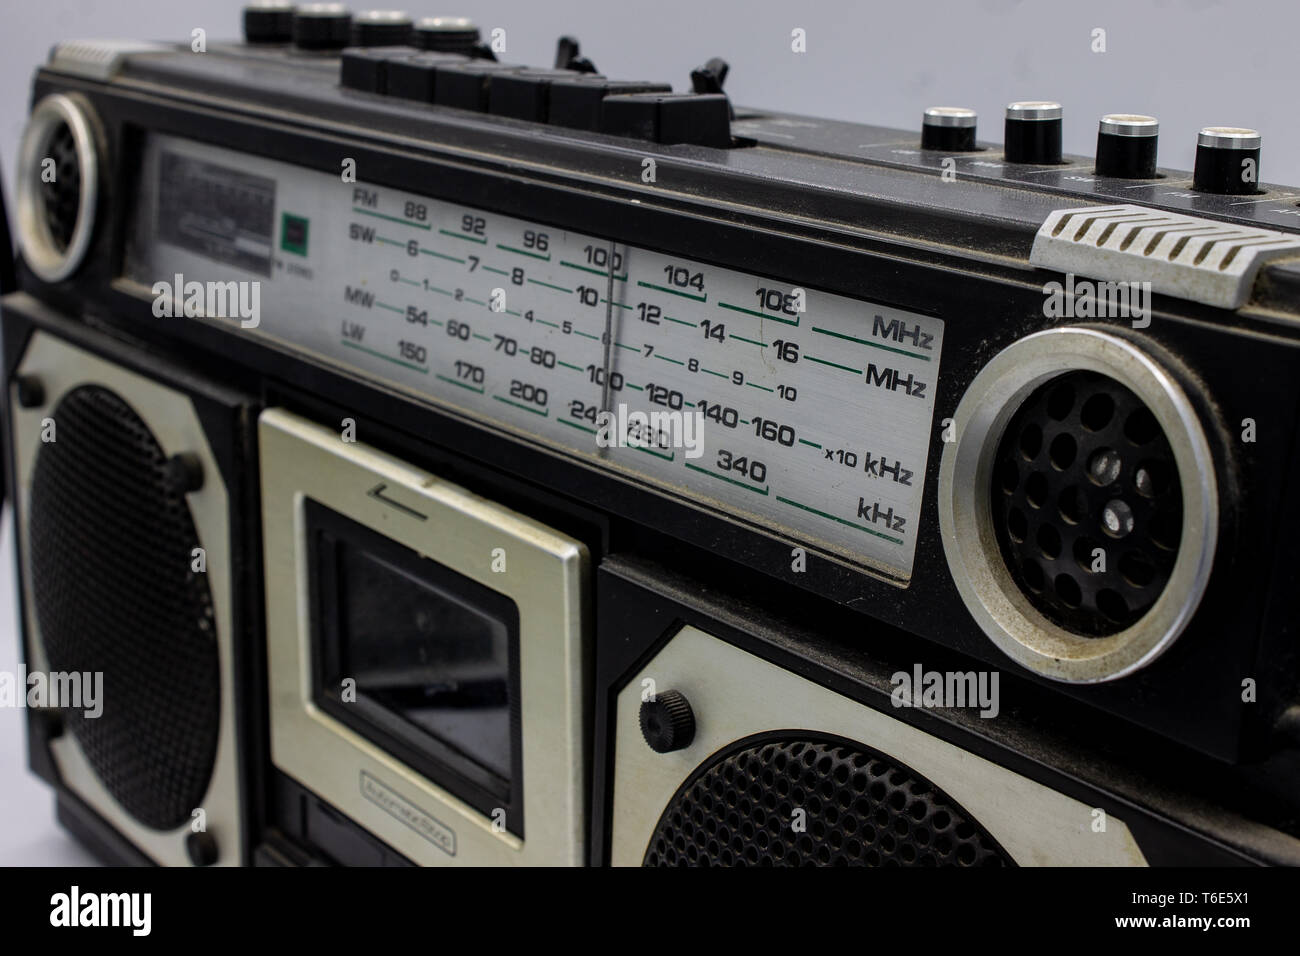 In the 70s and 80s the music was listened to through the cassettes, a magnetic storage device. The radios were very large, containing two speakers and Stock Photo